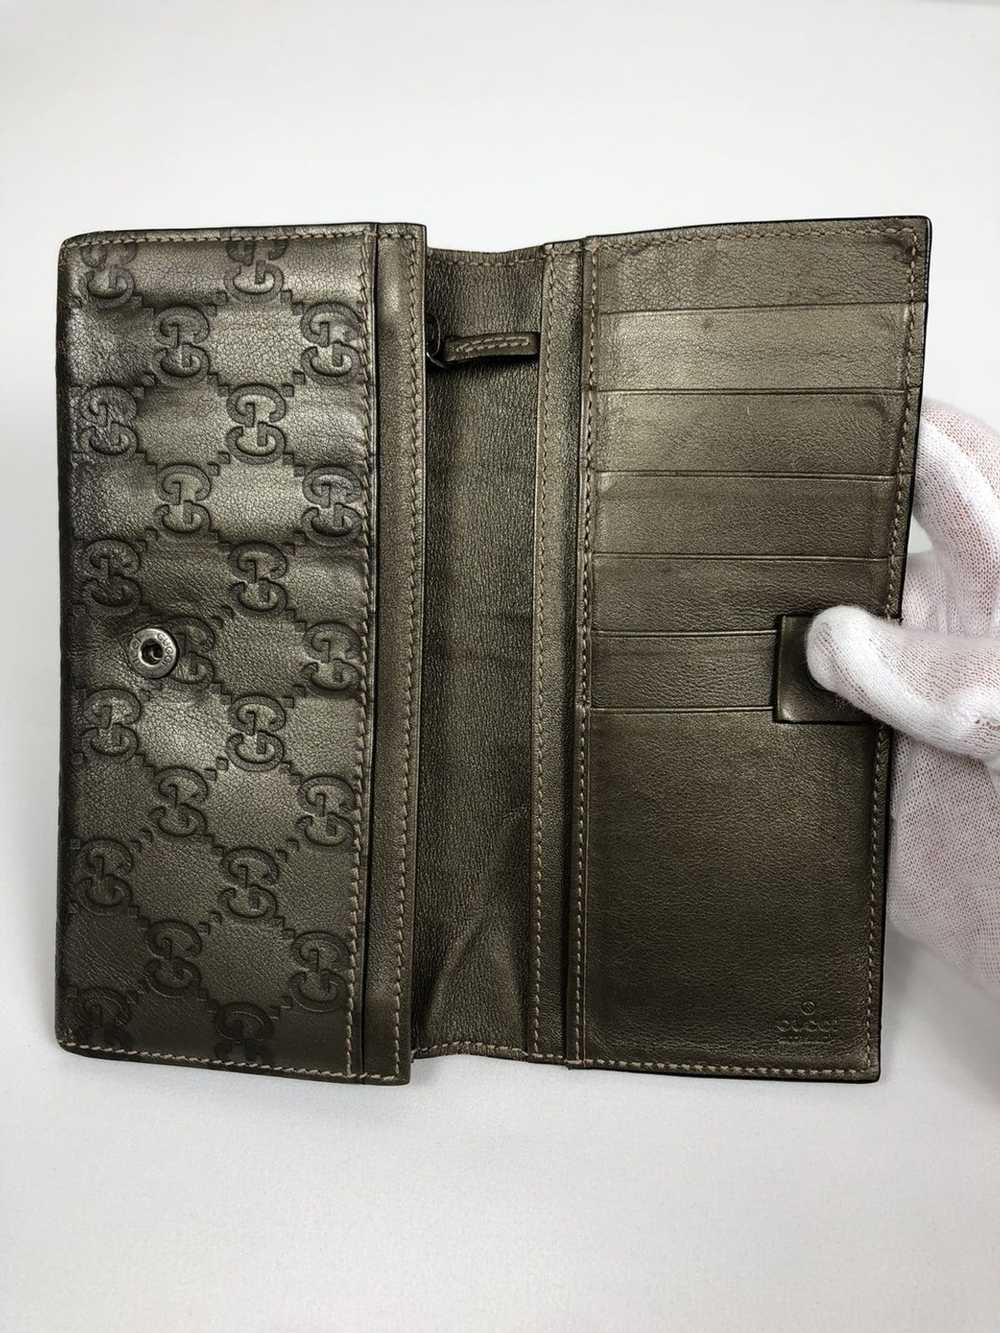 Gucci Gucci gg guccissima leather long wallet - image 3